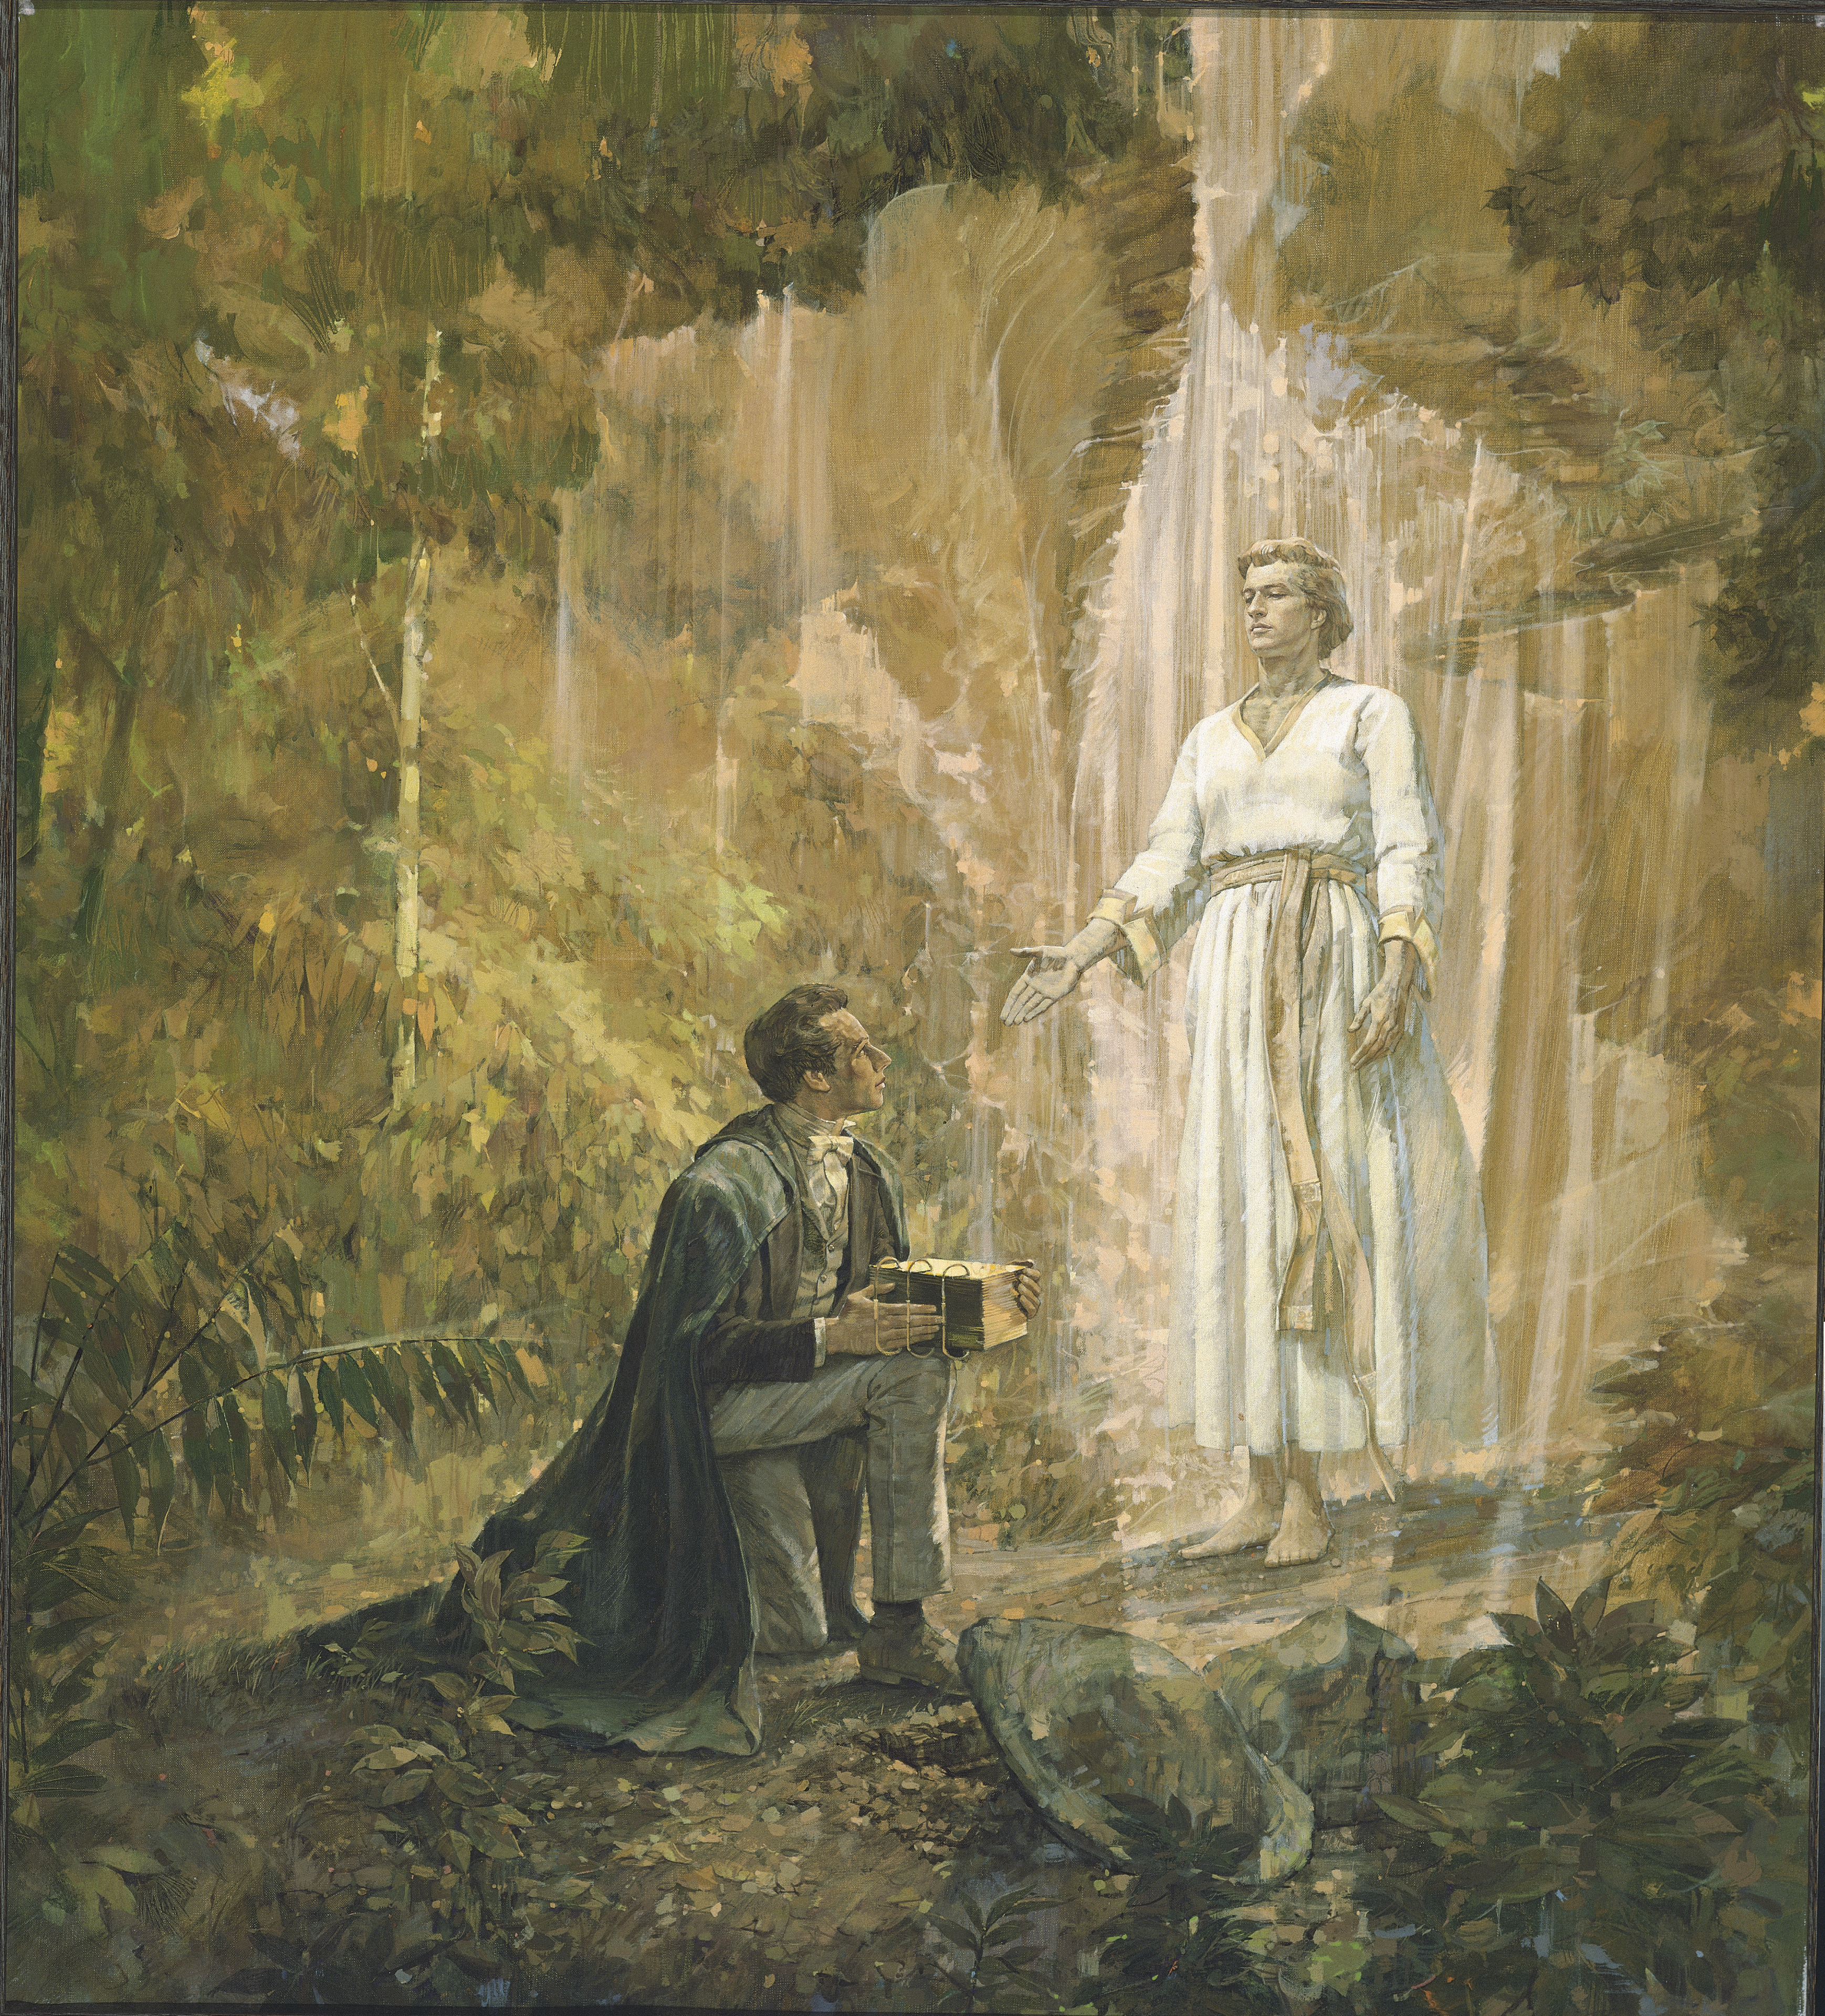 Joseph Smith kneeling on one knee and holding the gold plates as he looks up at the angel Moroni, who has appeared to him. Foreground and background depict plant and tree foliage.